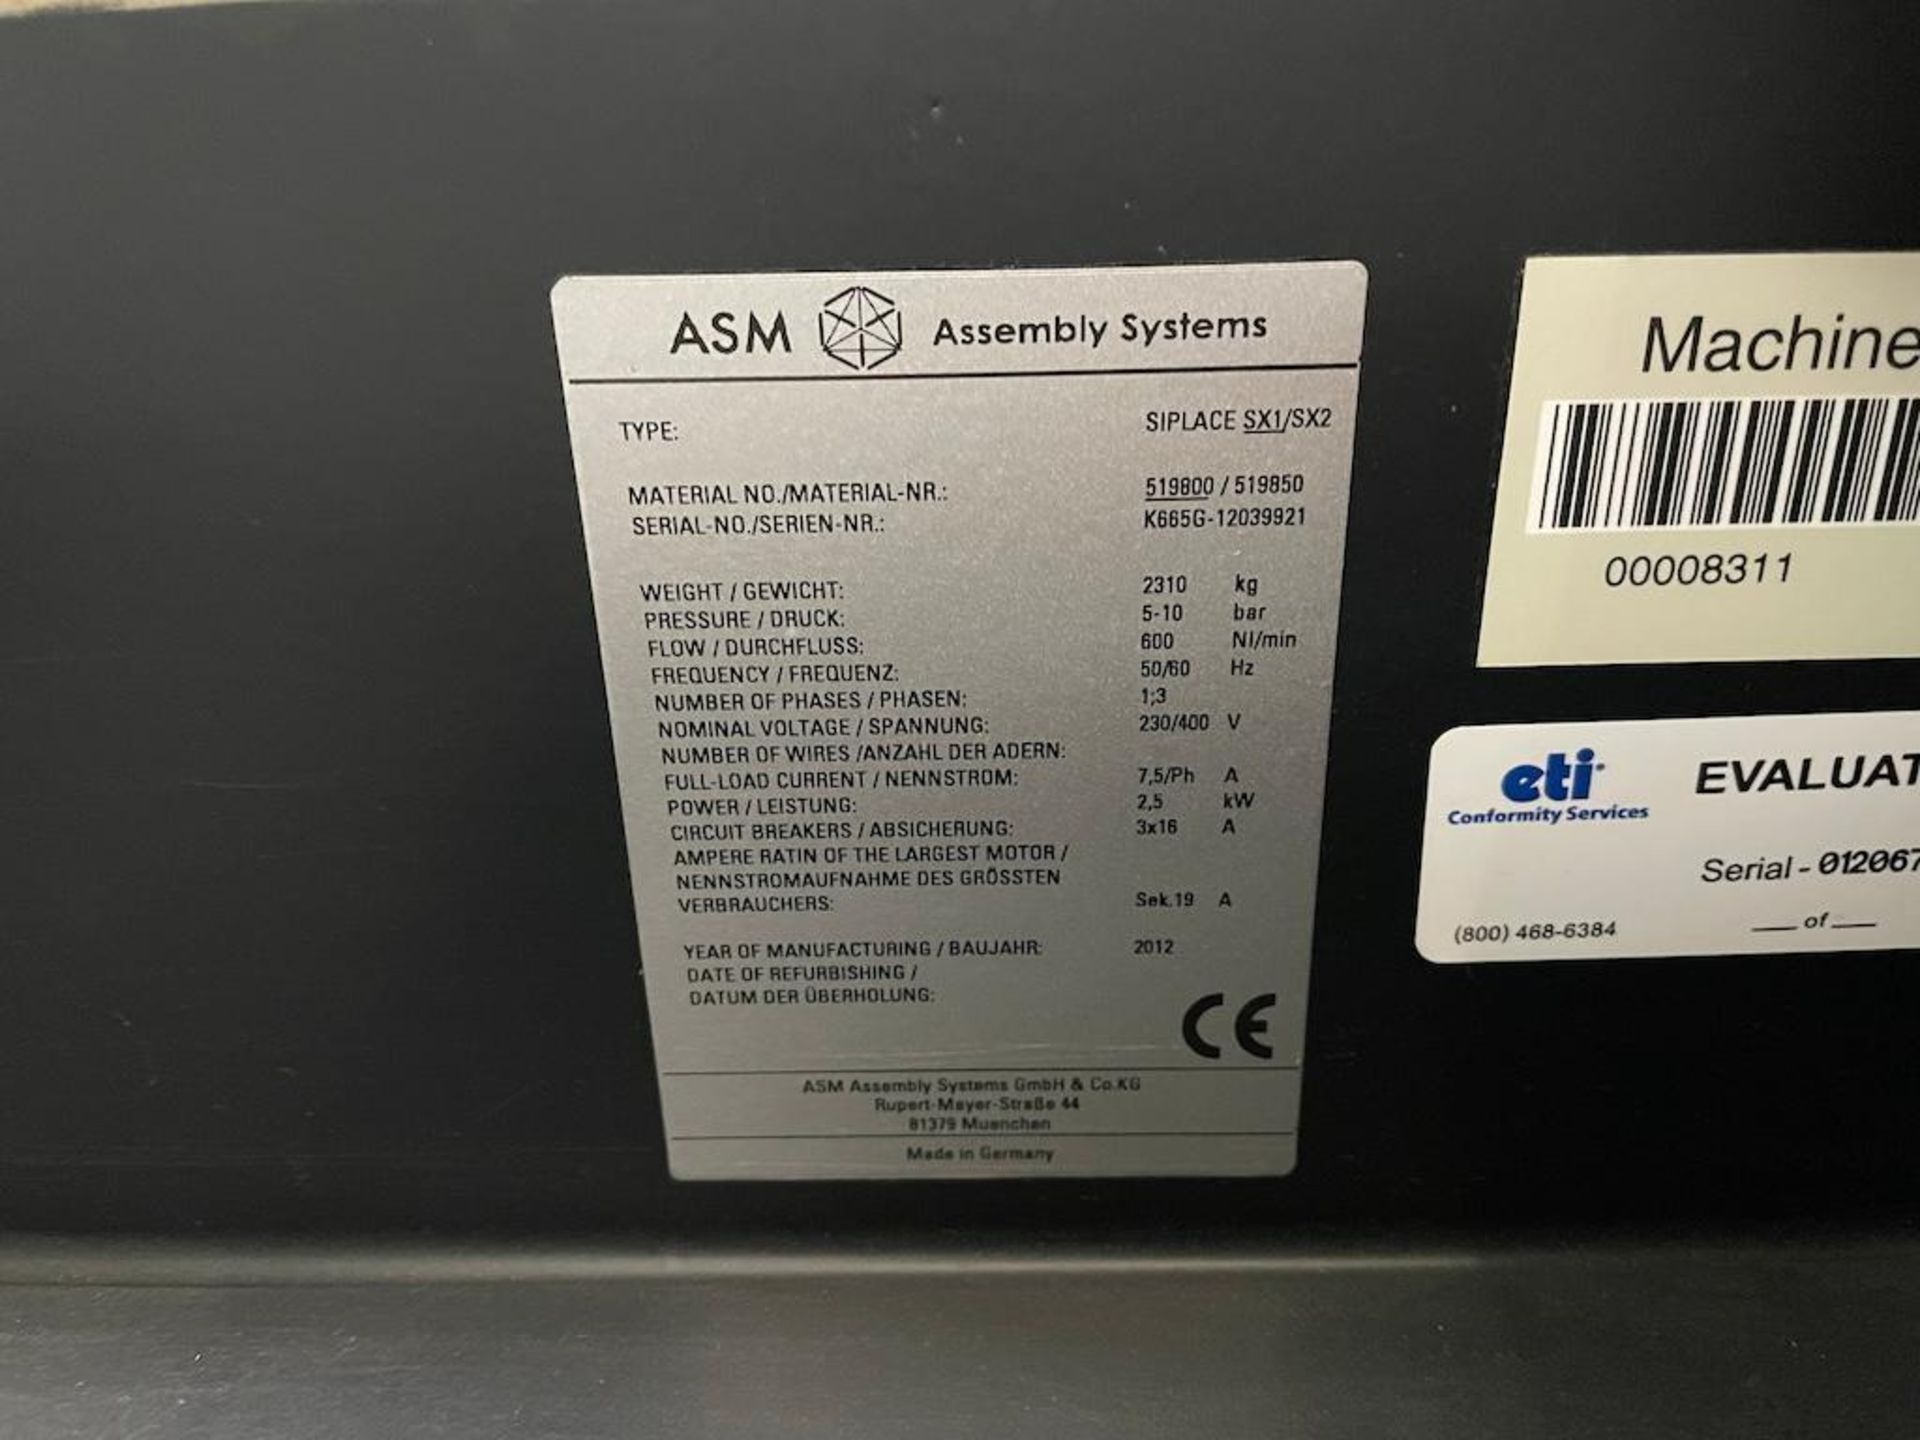 2012 ASM ASSEBLY SYSTEMS, TYPE SIPLACE SX1/SX2, SN K665G, 60 STATION SCHNEEBERGER, MATR NR 590 200 3 - Image 4 of 4